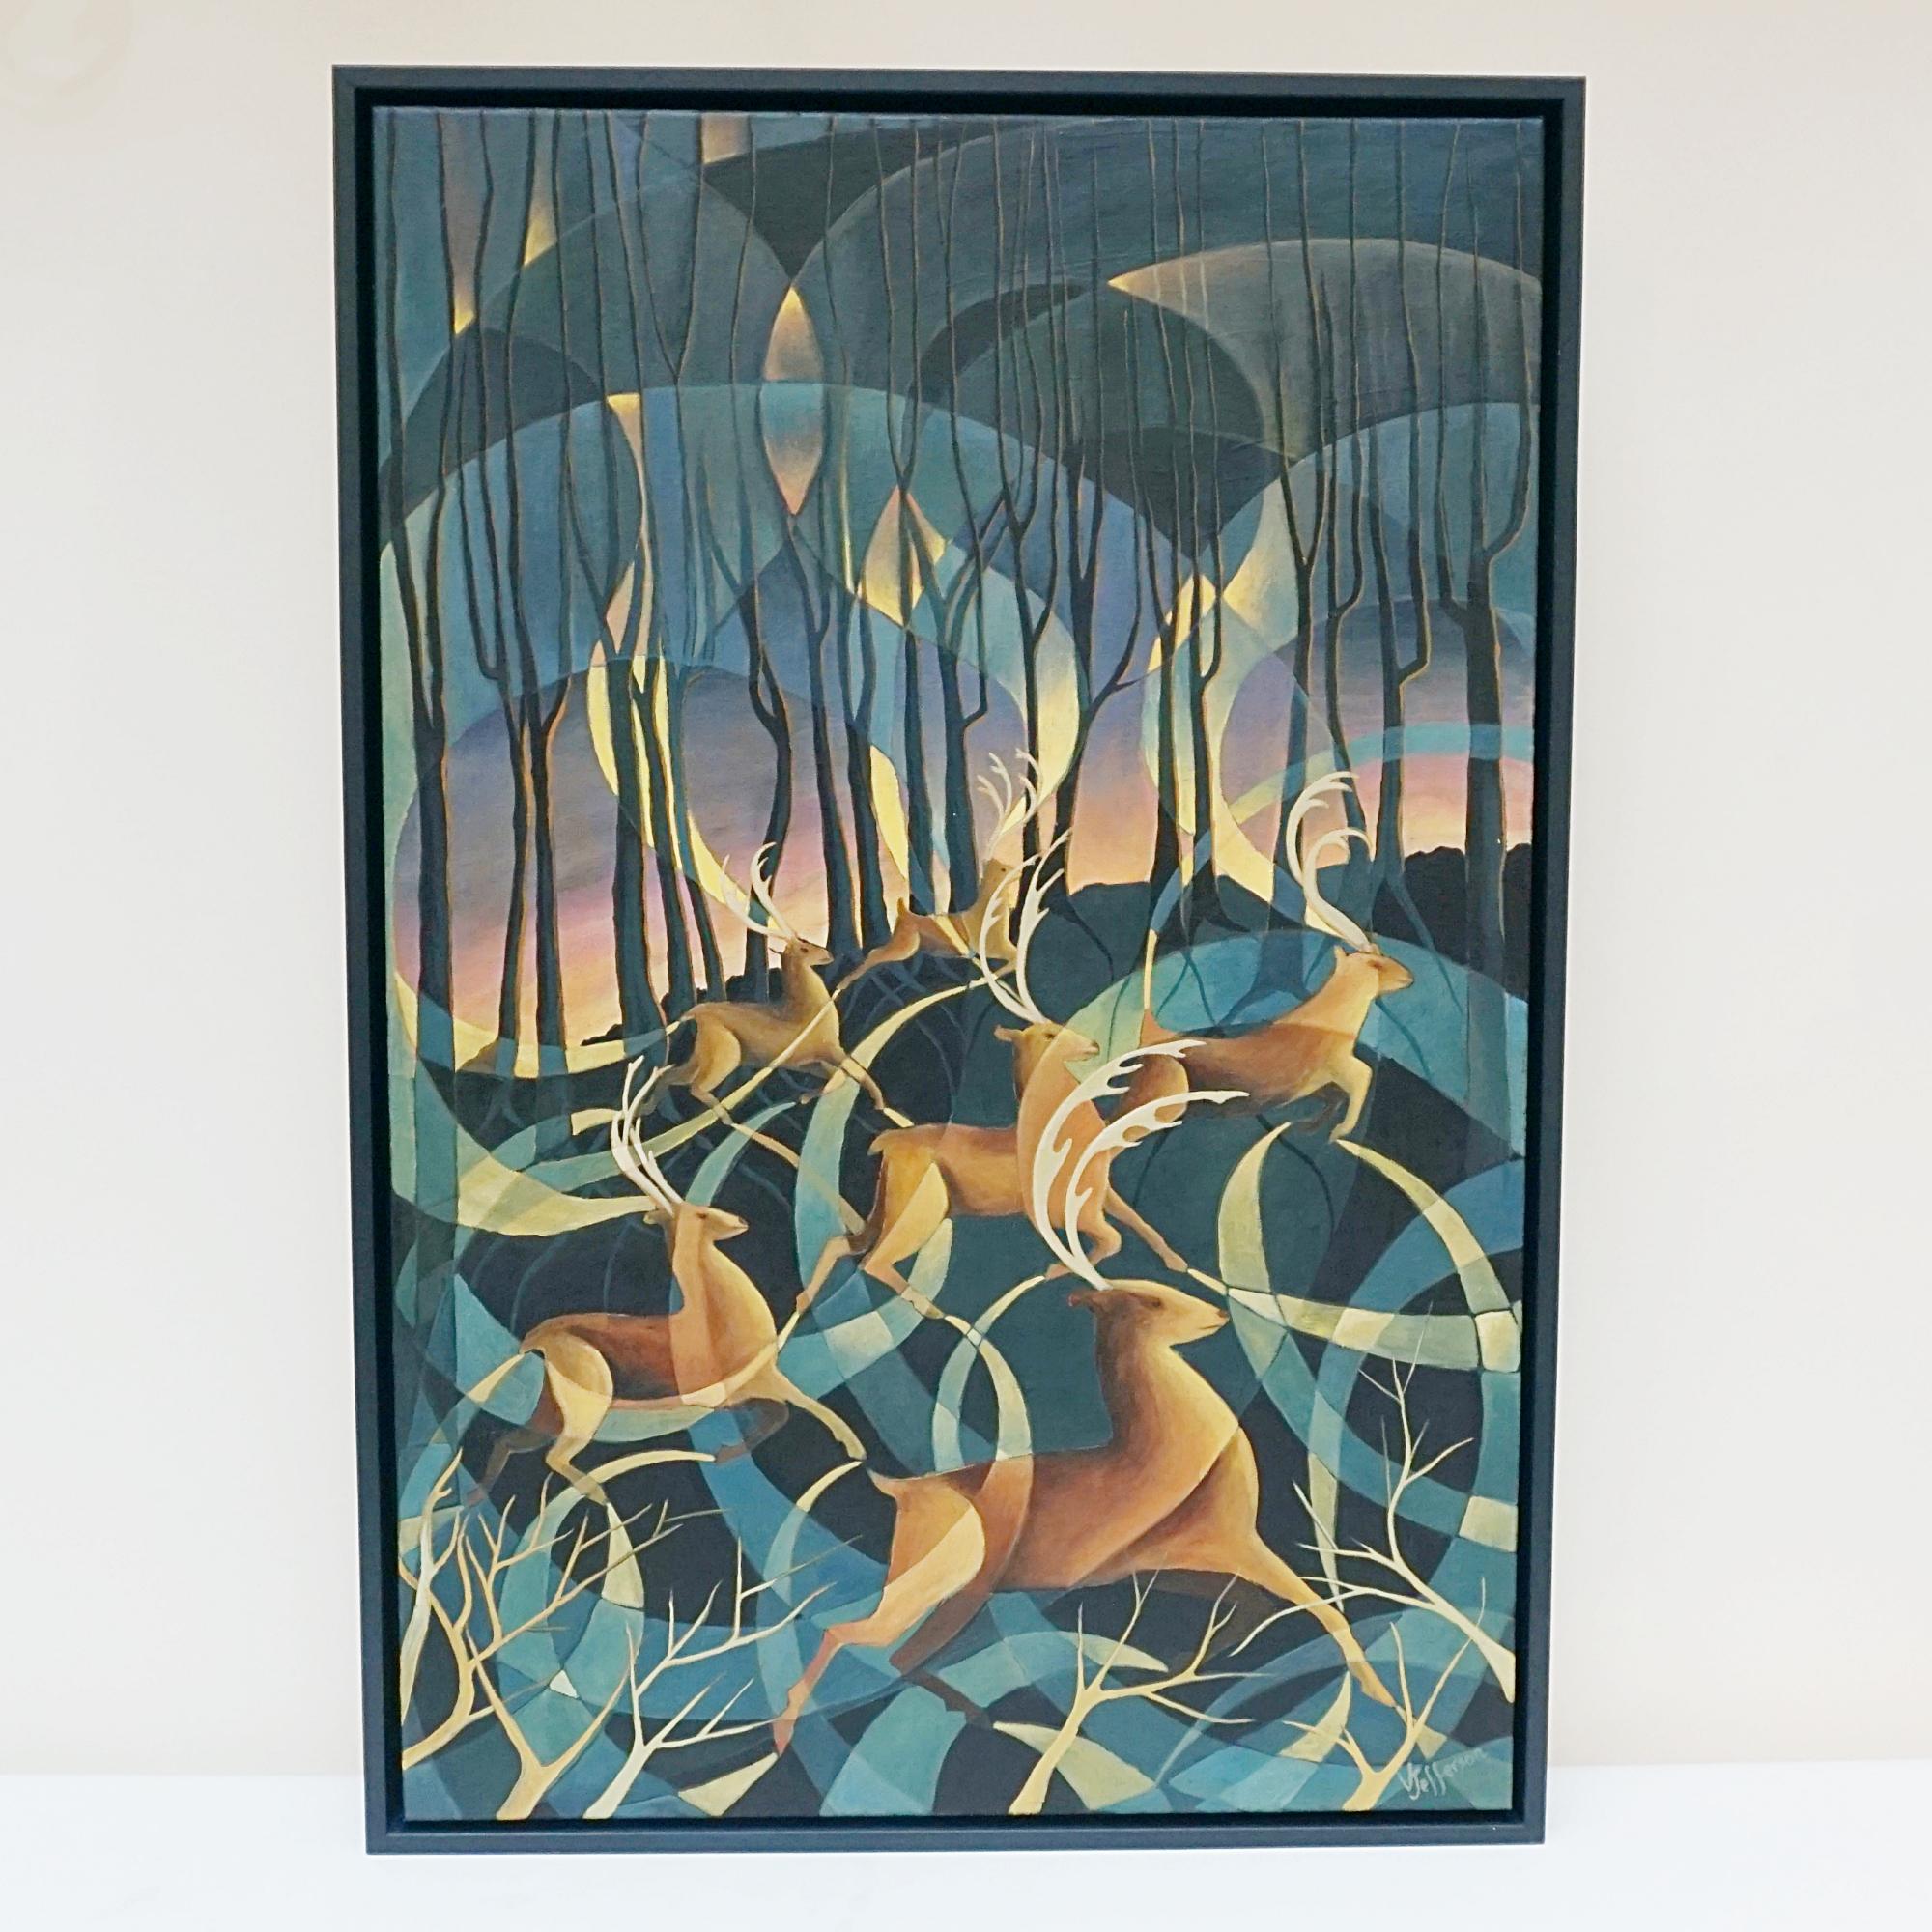 'Deer At Dusk' An Art Deco Style Contemporary painting by Vera Jefferson depicting galloping deer against a stylised woodland background. Signed V Jefferson to lower right. 

Dimensions: H 93cm W 63.5 D 5cm

 Vera Jefferson trained at Goldsmiths